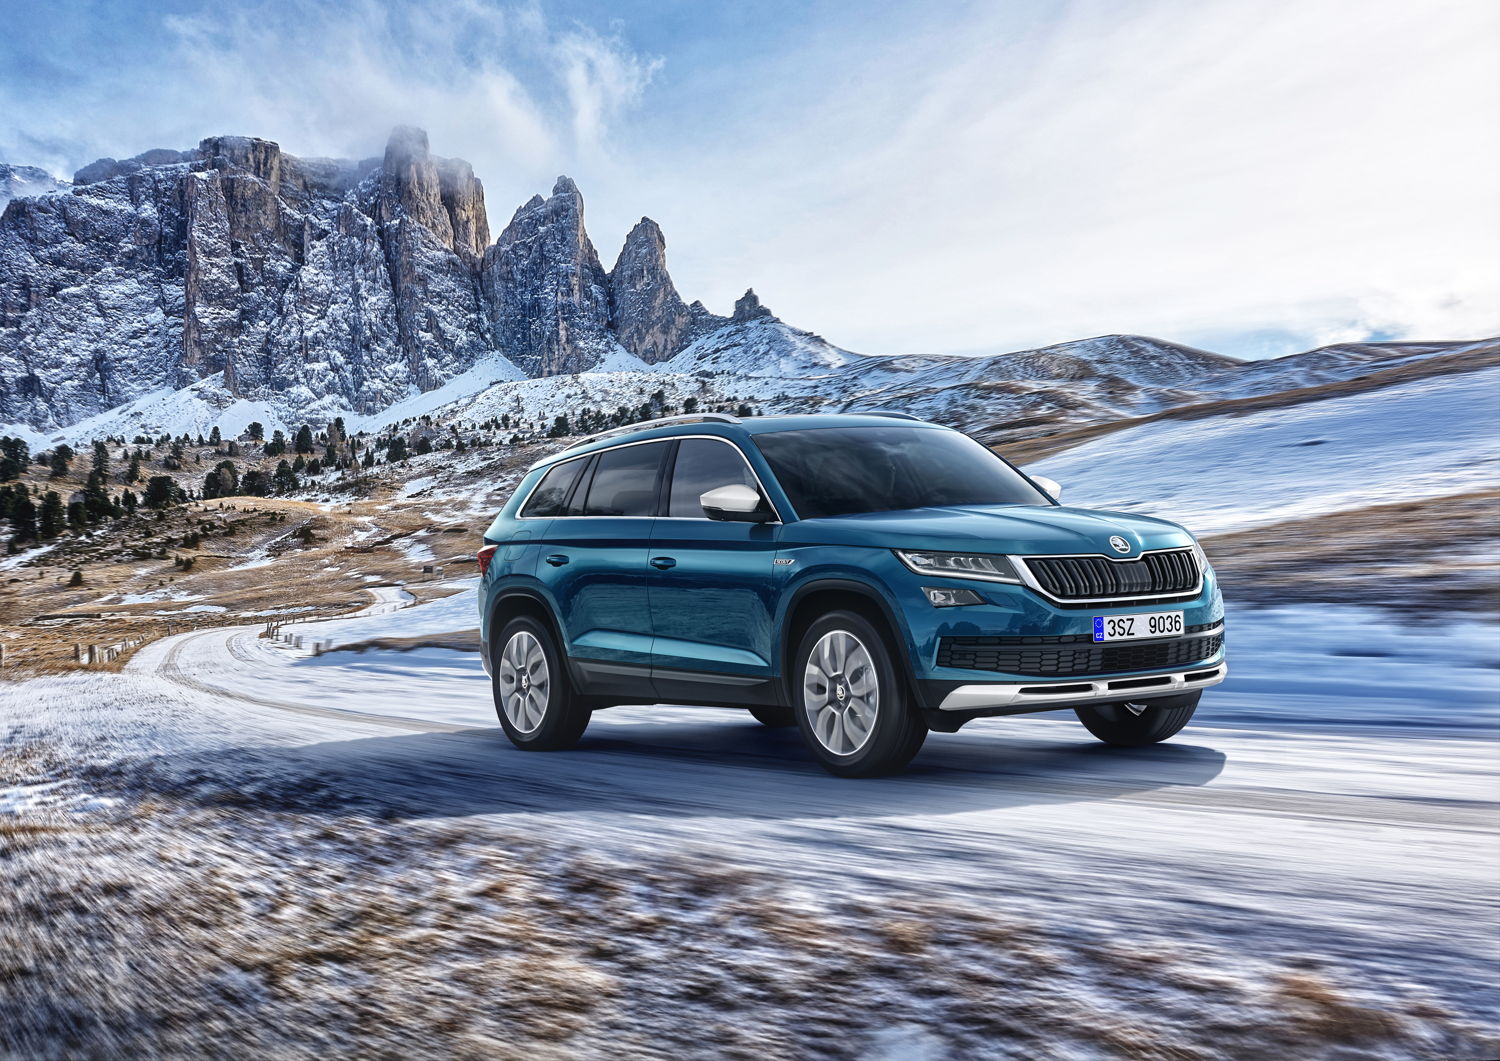 The traditional Czech brand continues along the road to success, recording profitable growth. The SUV campaign launched with ŠKODA KODIAQ (photo) is a cornerstone of this sustainably positive development.